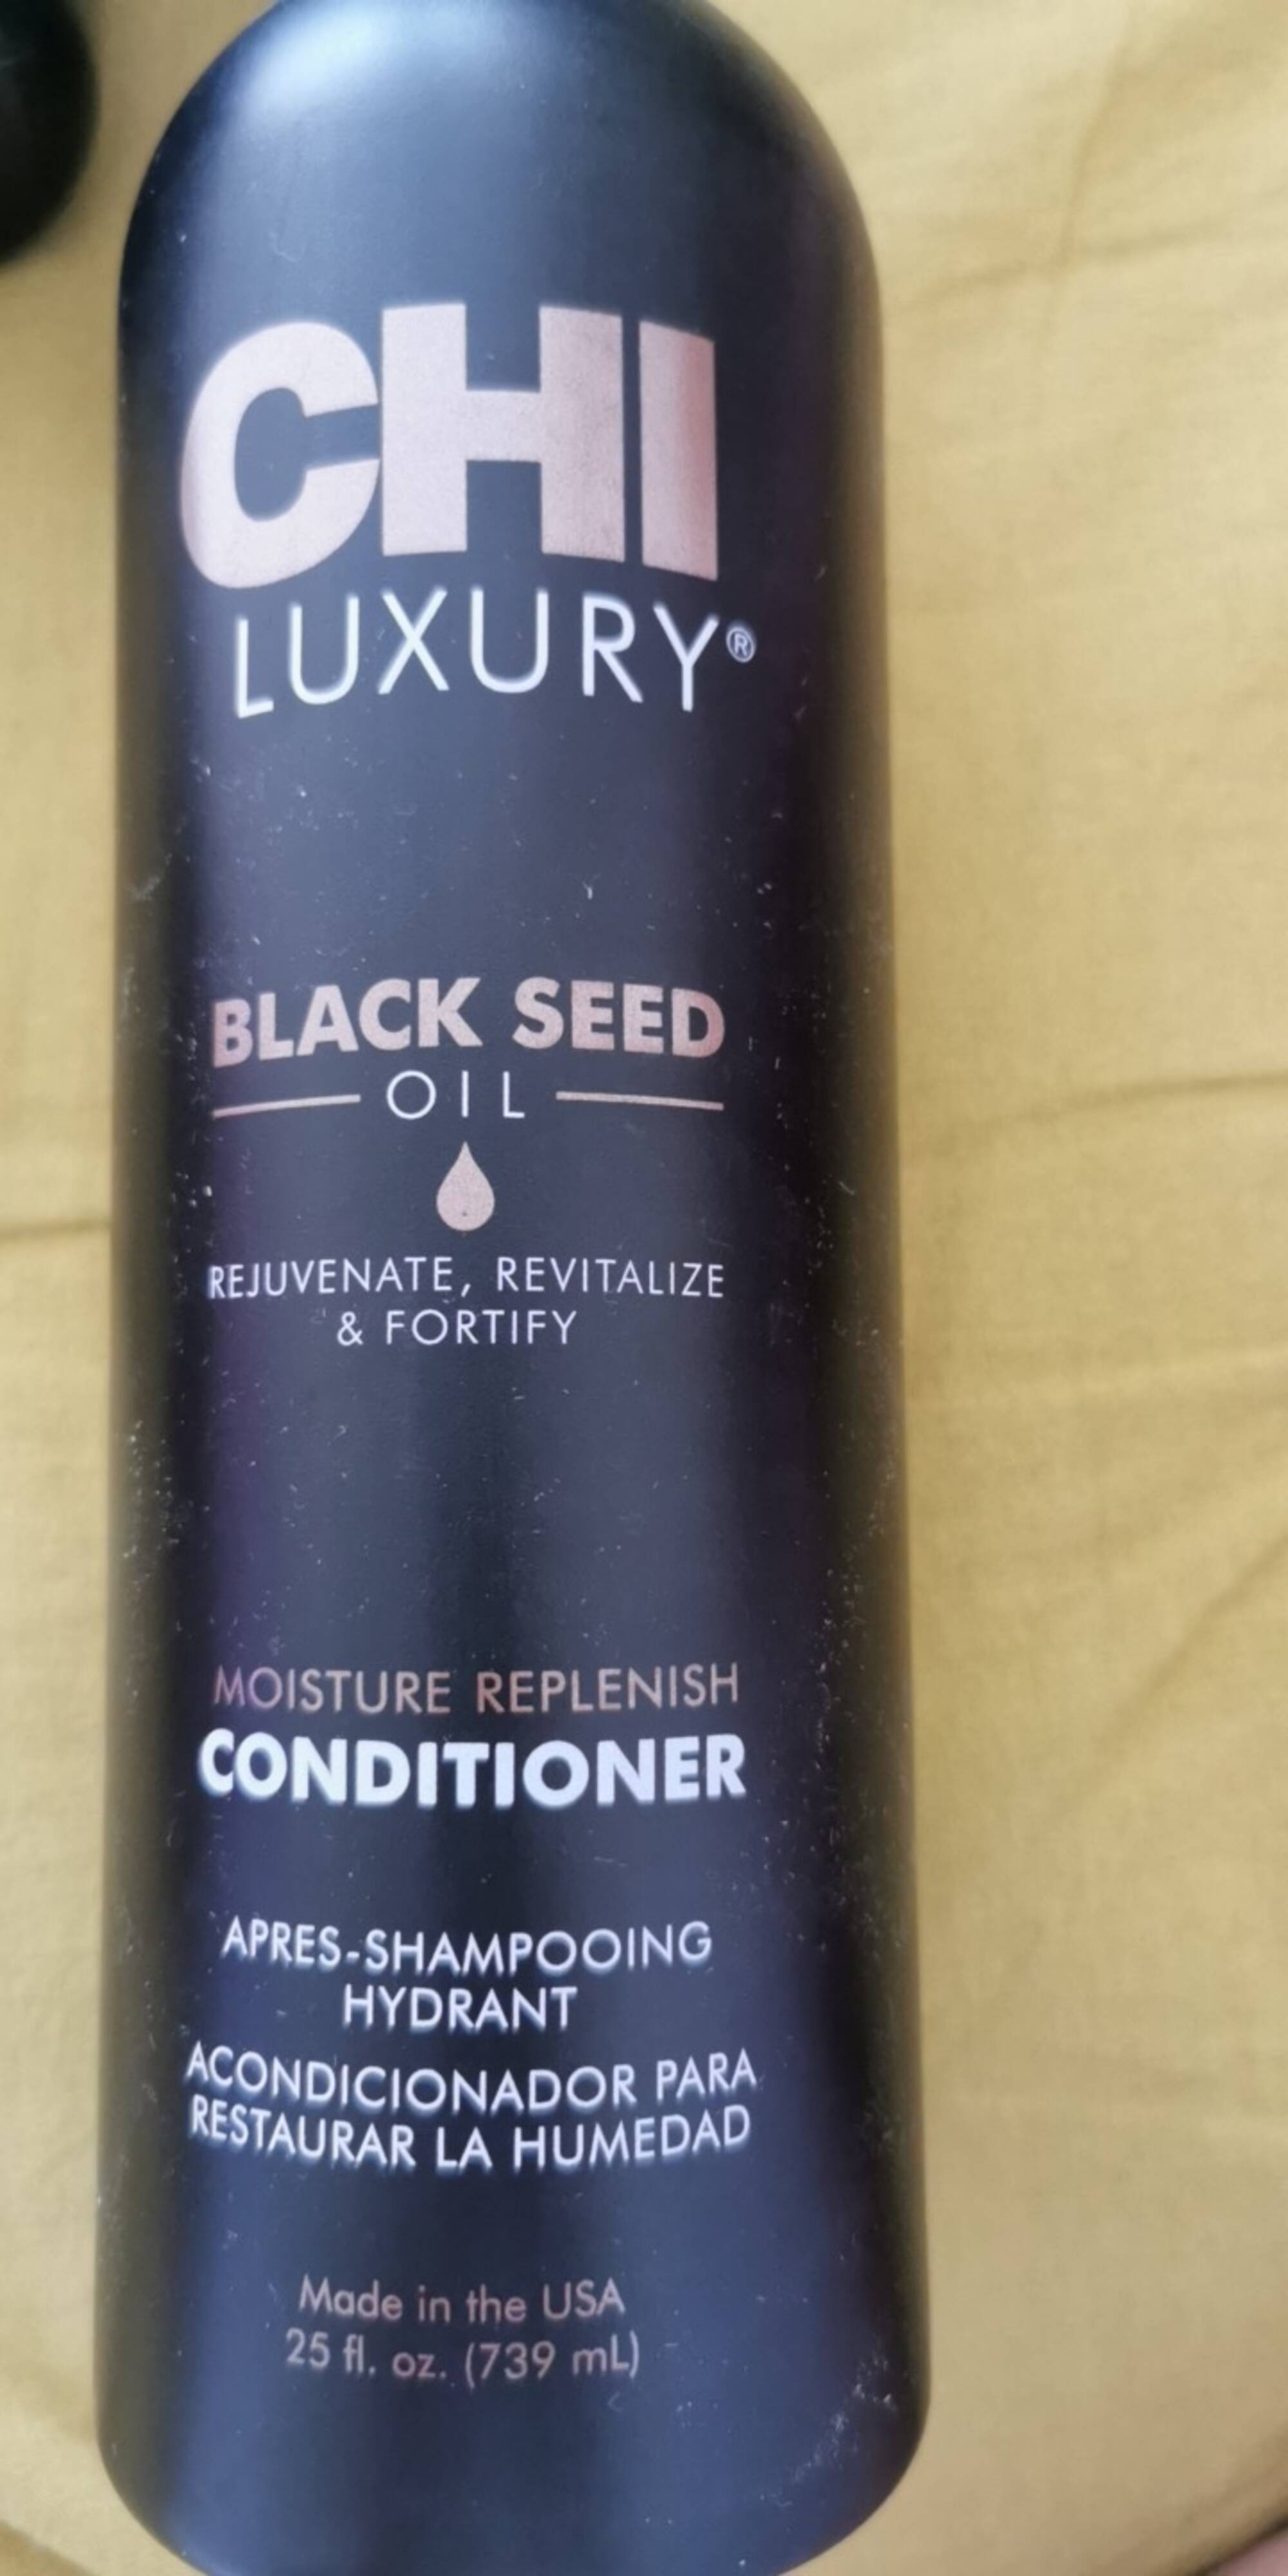 CHI - Luxury Black seed oil - Conditionner